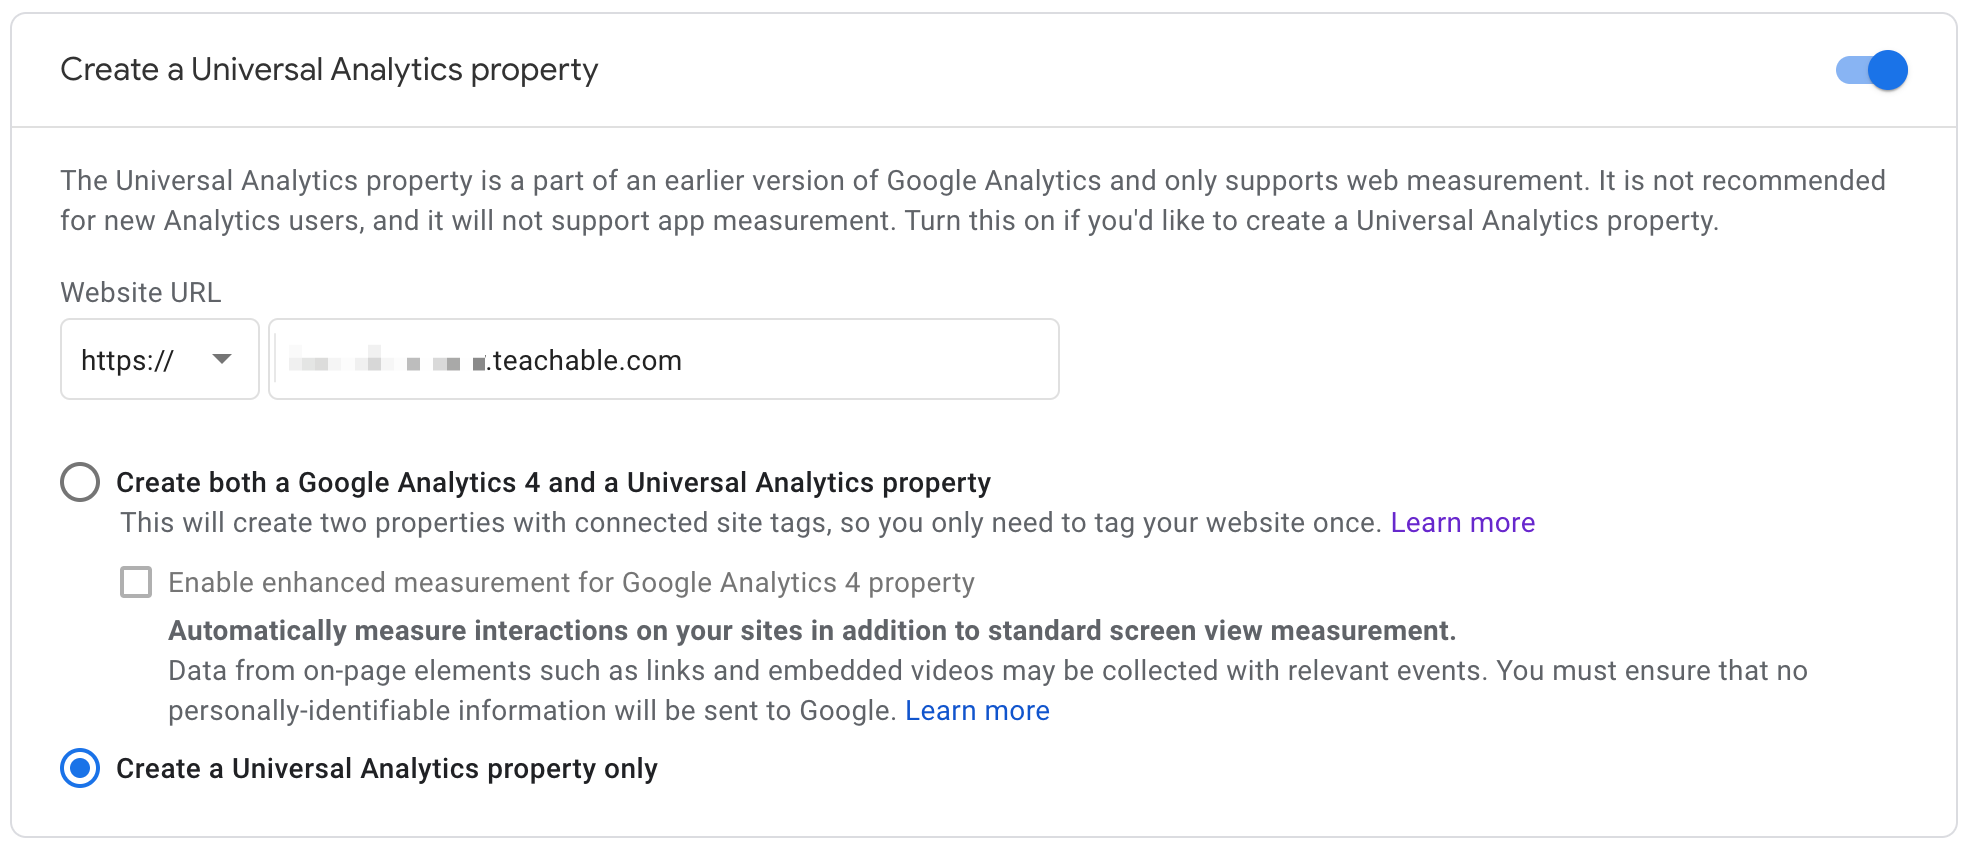 The screen shows a setup wizard for Google Analytics. The heading of the page is CREATE A UNIVERSAL ANALYTICS PROPERTY. The WEBSITE URL field is filled with a Teachable school URL. Then, the radio button CREATE A UNIVERSAL ANALYTICS PROPERTY ONLY is selected.